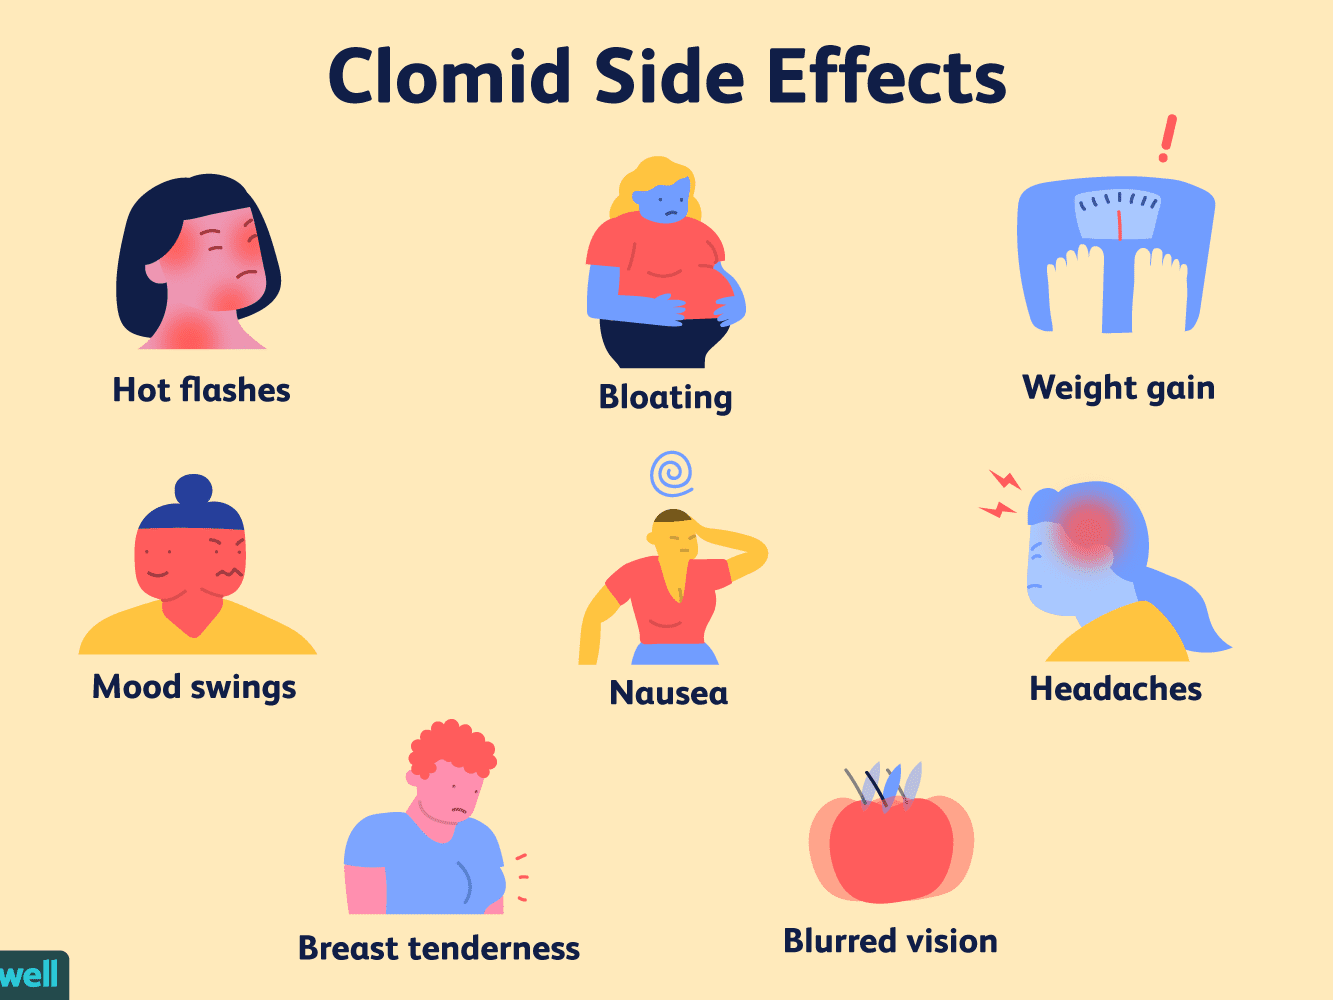 clomid-clomiphene-side-effects-and-risks-1959972-5c7834d546e0fb000140a3e1.png